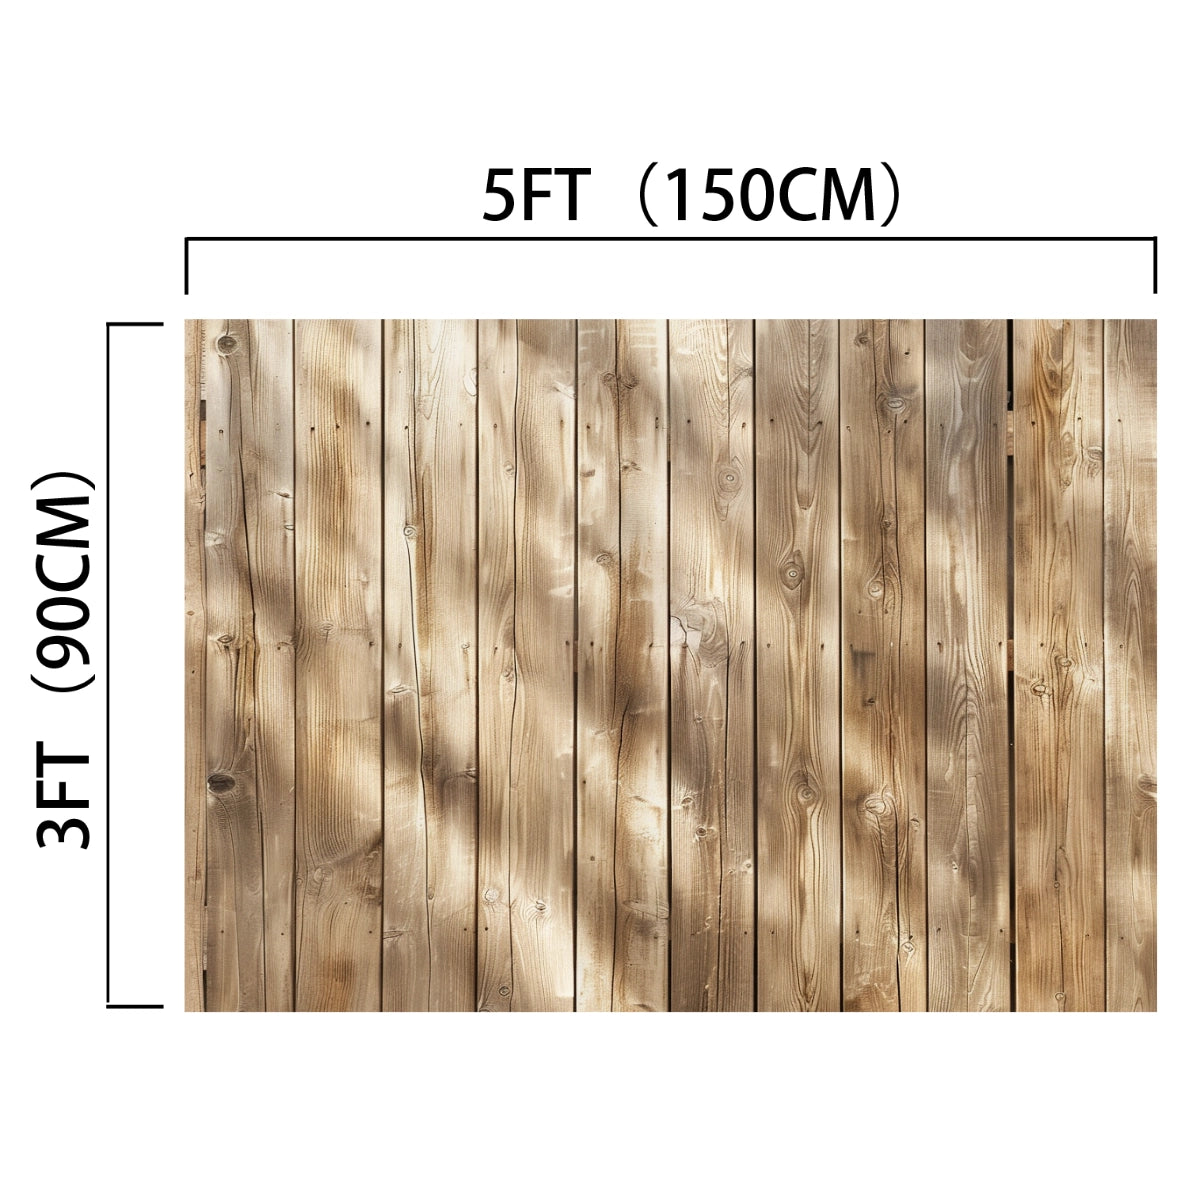 Brown Wood Backdrops for Photography Vintage Brown Background Baby Shower Birthday Photo Booth Studio Props by ideasbackdrop with dimensions labeled as 5 feet (150 cm) by 3 feet (90 cm), perfect for high-resolution printing and designed with wrinkle resistance for a flawless display.